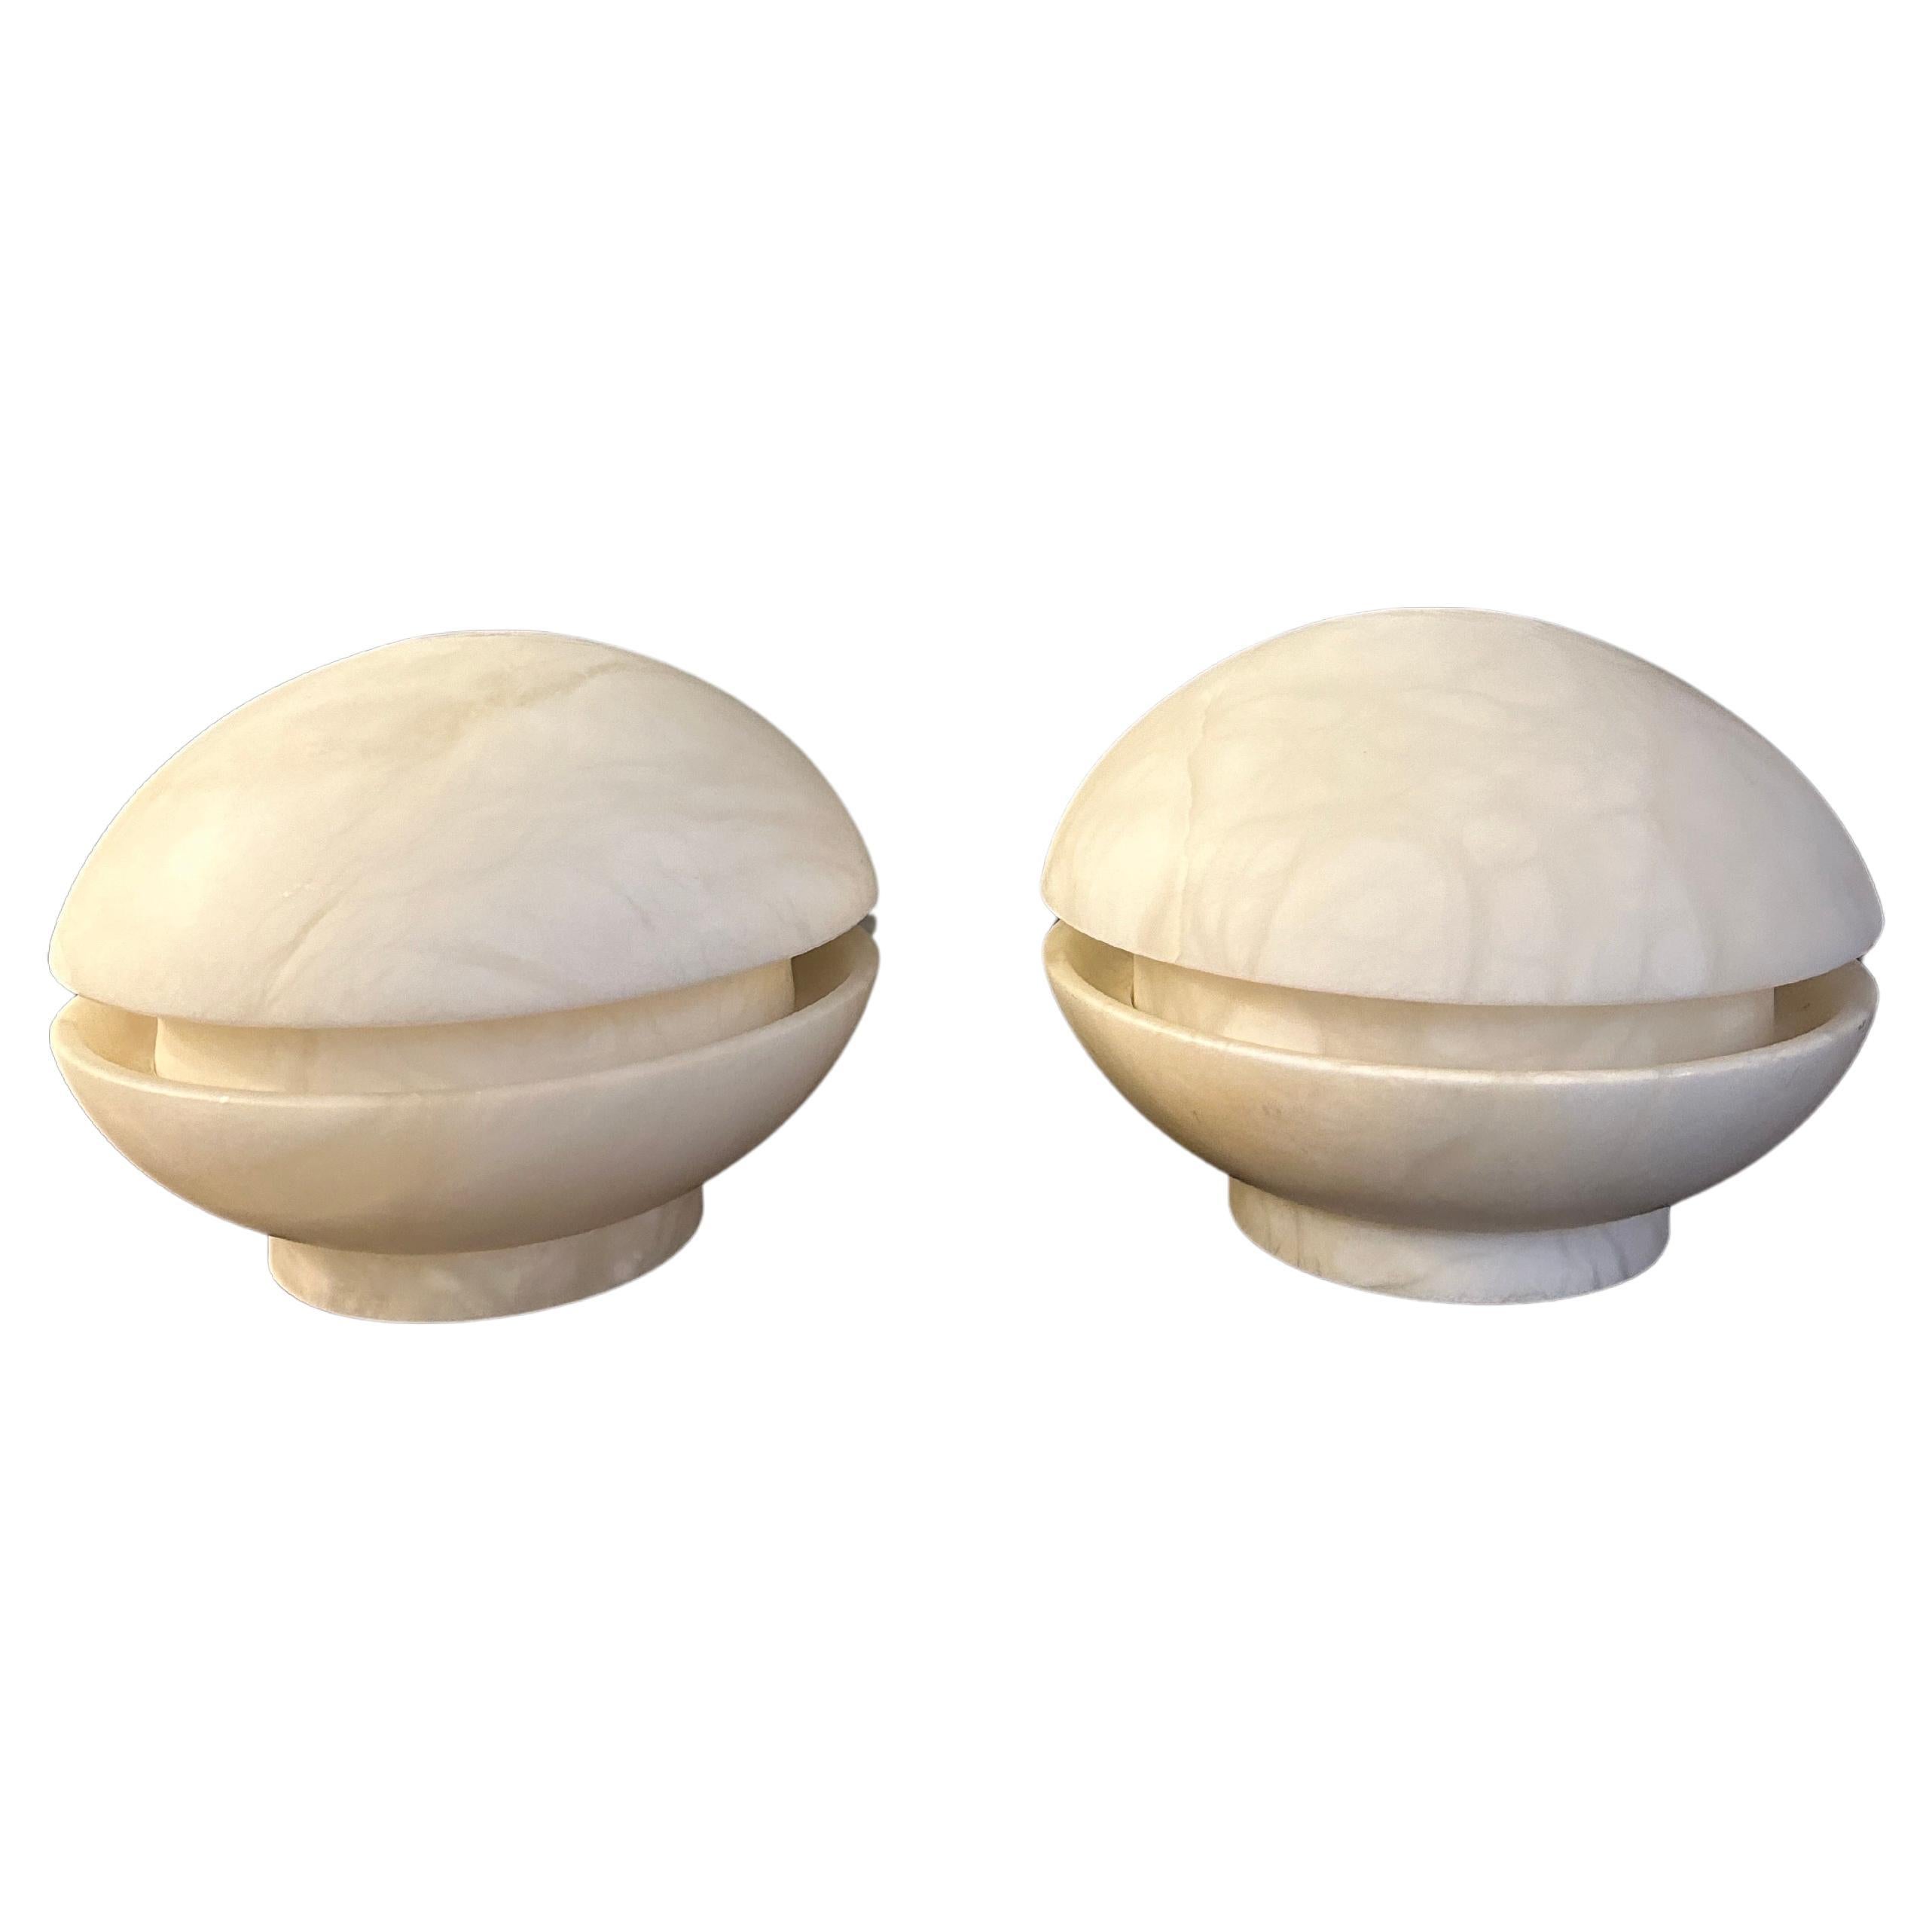 A pair of almost UFO shaped Alabaster table lamps, very Mid Century in style. White alabaster with gentle veining. As shown in images with two different shades of light given when using an opaque bulb then a clear bulb so quite versatile in light